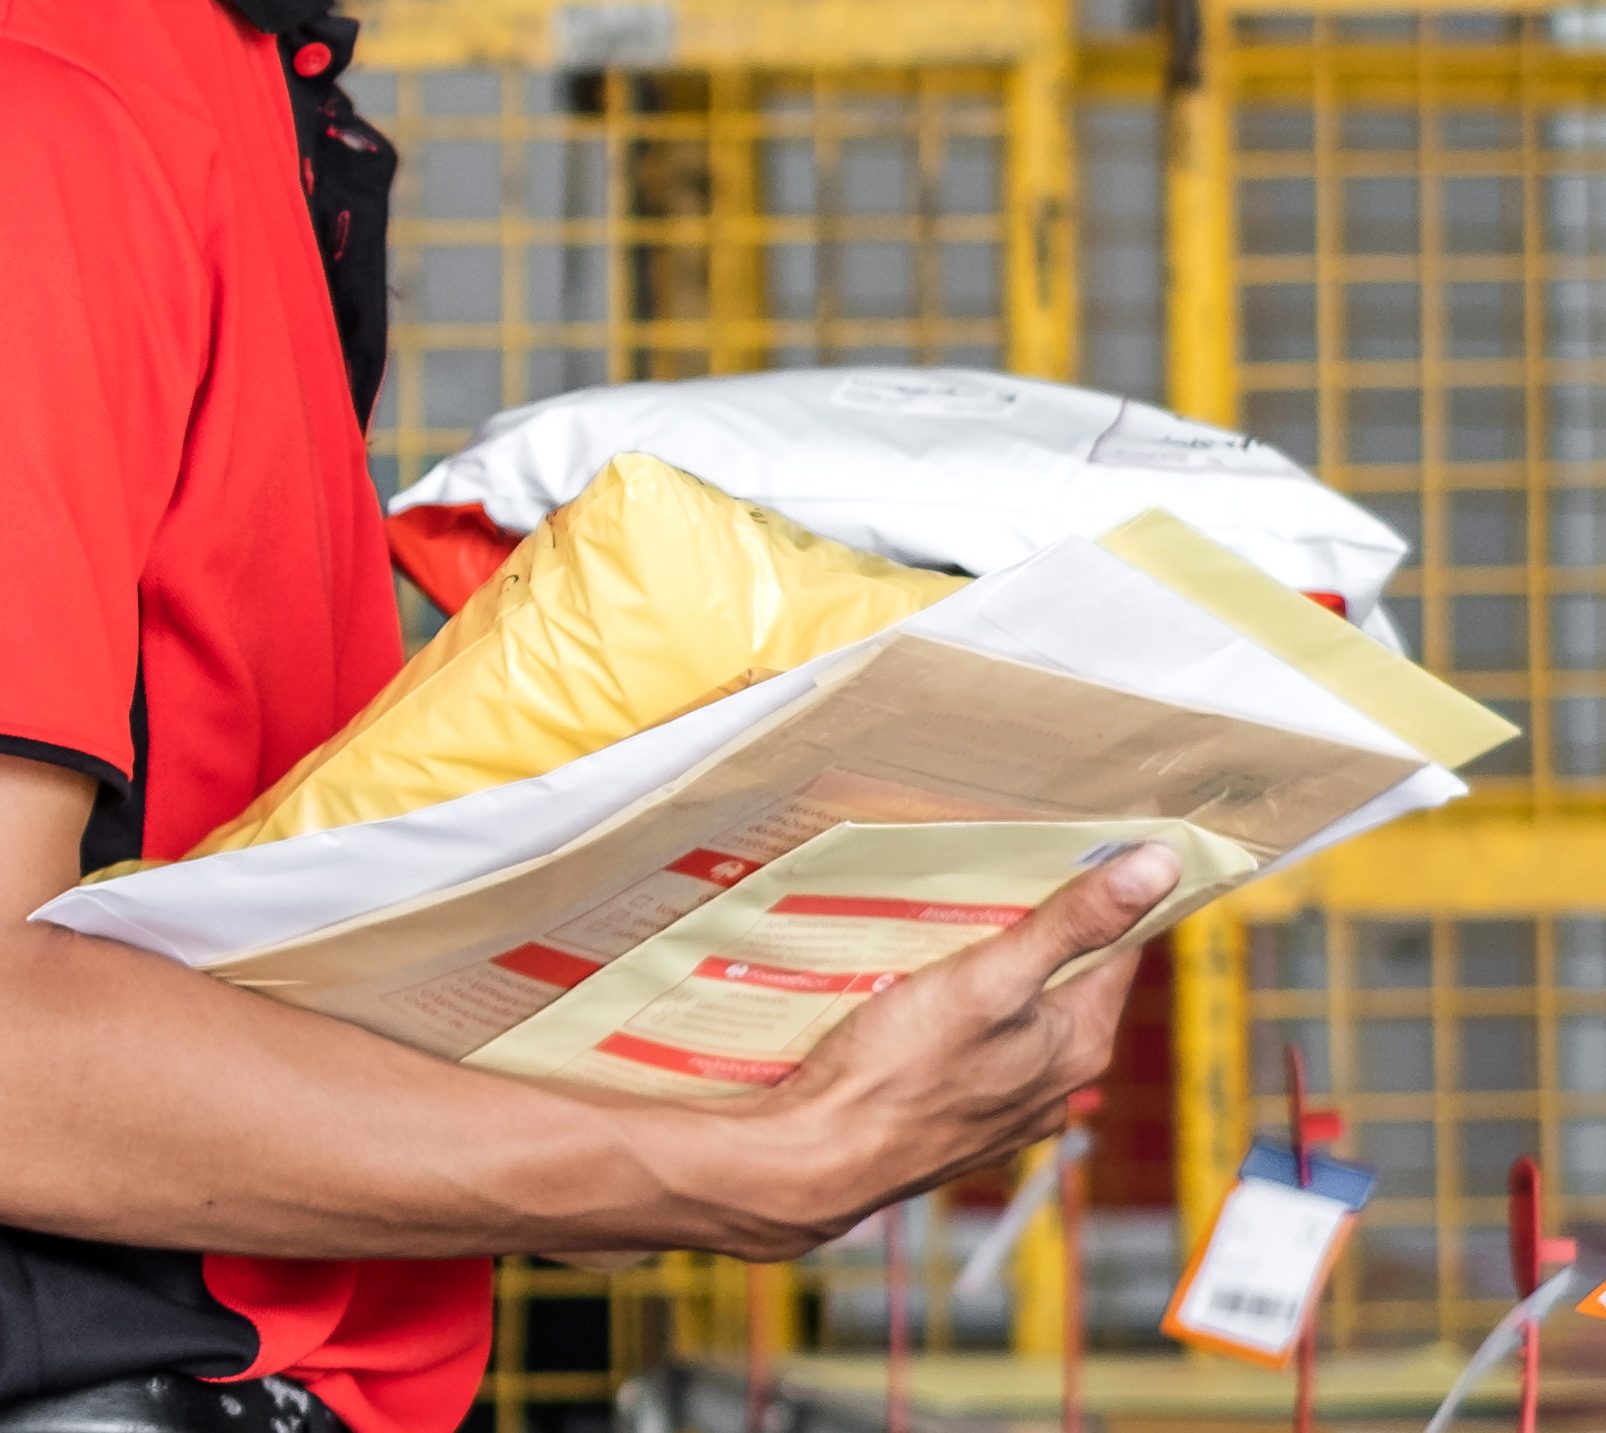 Overwhelmed employee with arms full of return packages